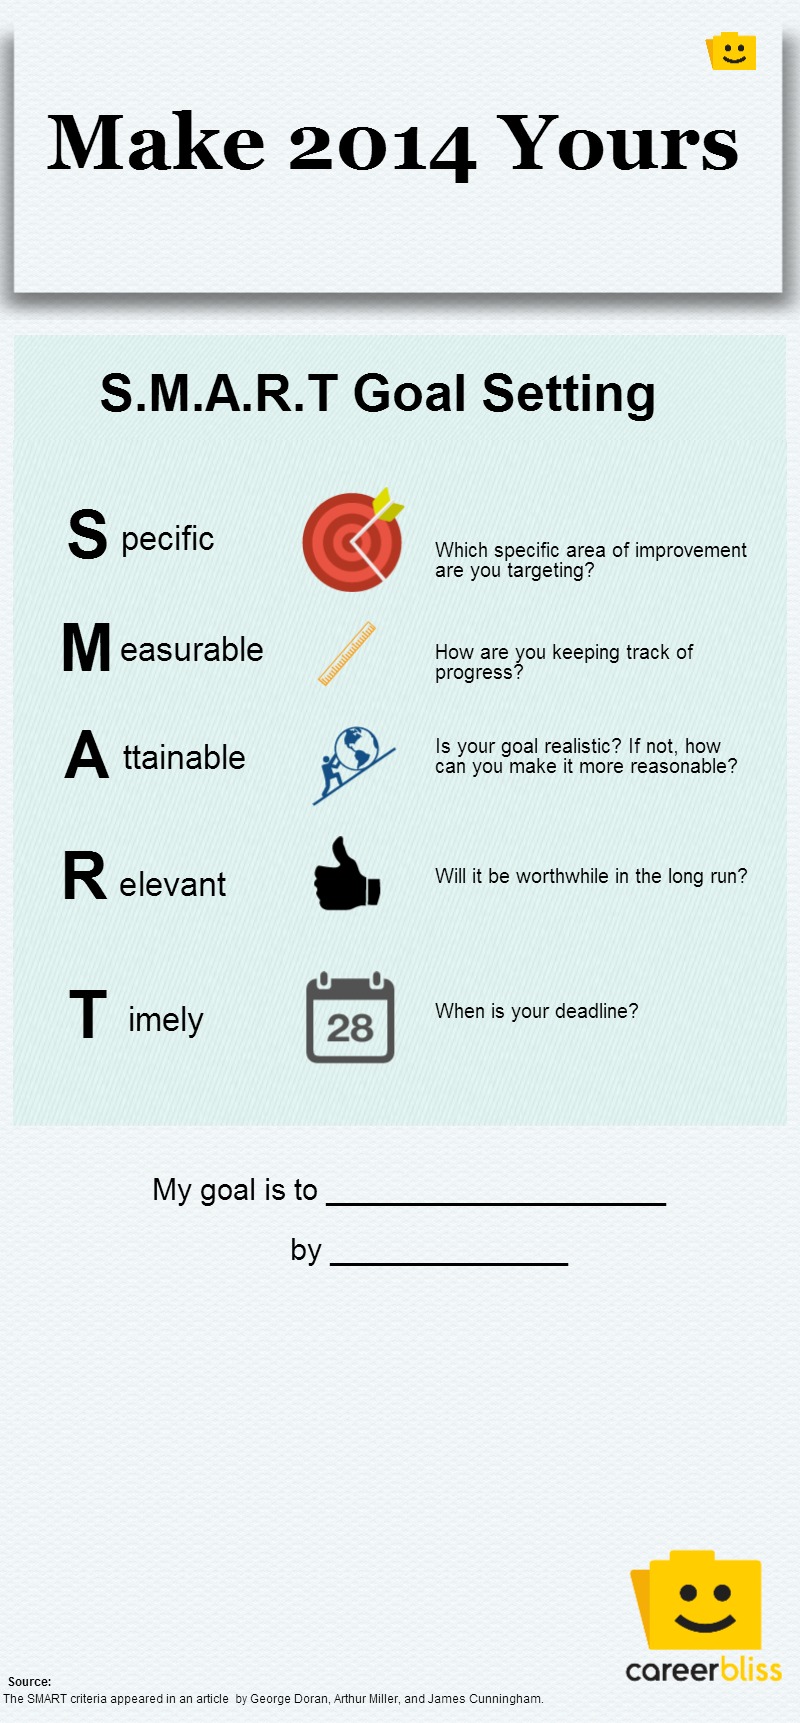 Create S.M.A.R.T. Goals for 2014 [Infographic] CareerBliss